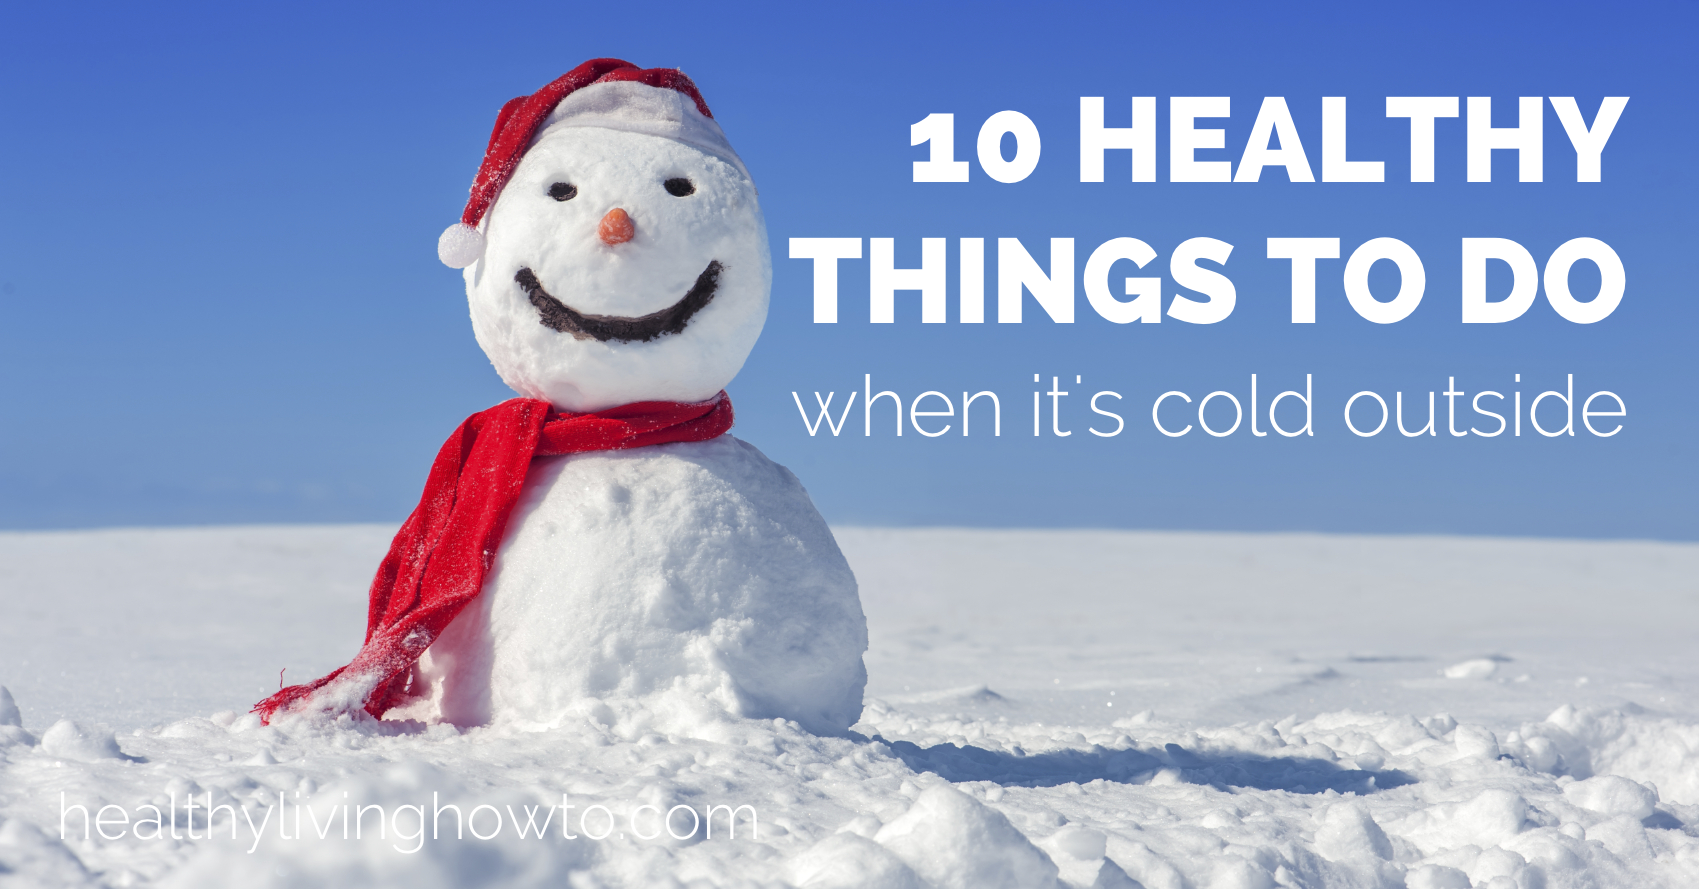 10 Healthy Things To Do When It's Cold Outside | healthylivinghowto.com